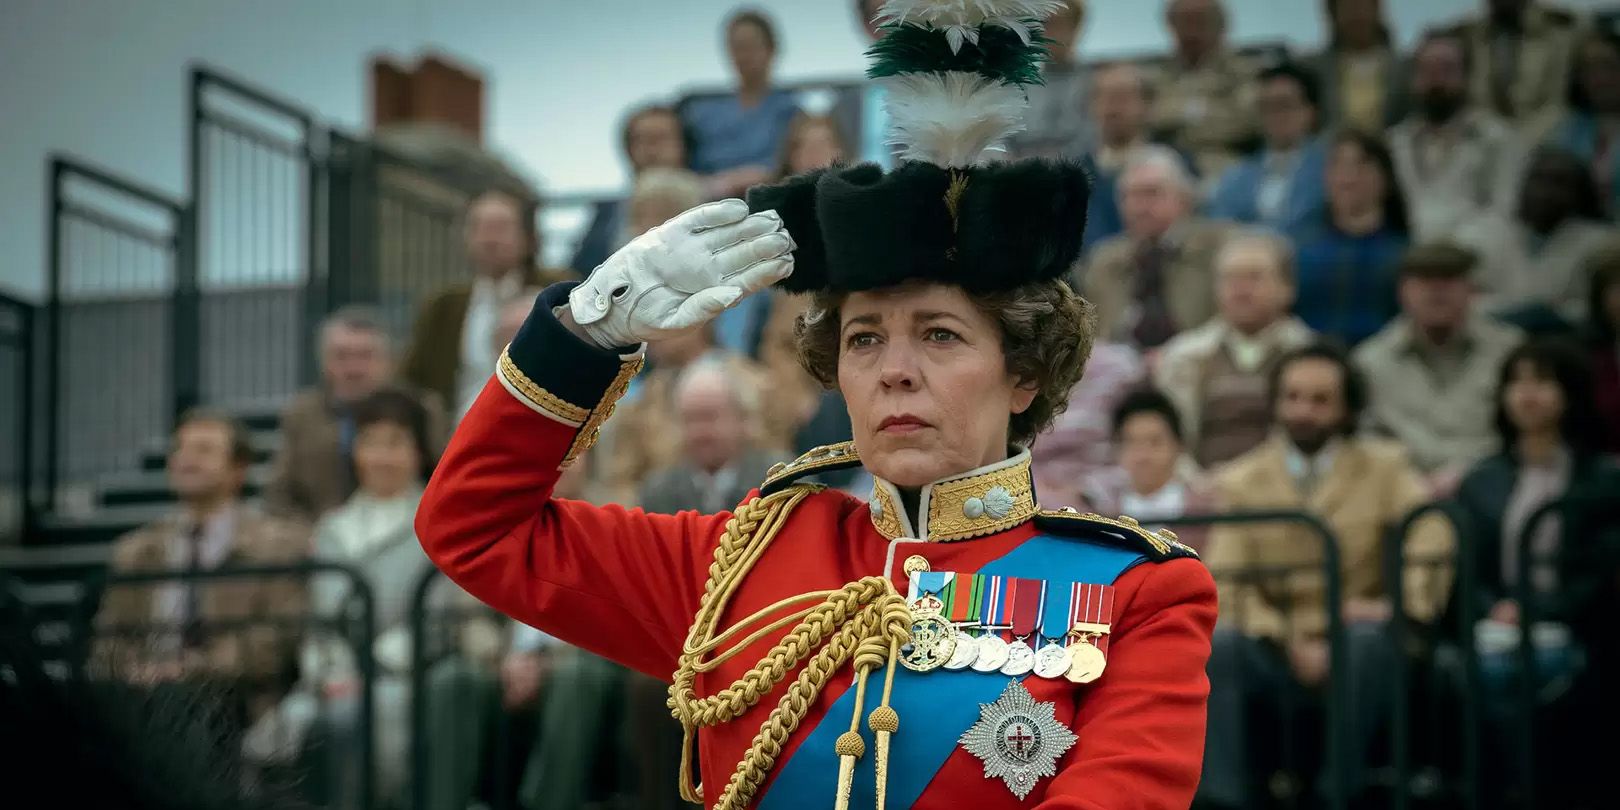 The Queen Trooping the Colour in The Crown